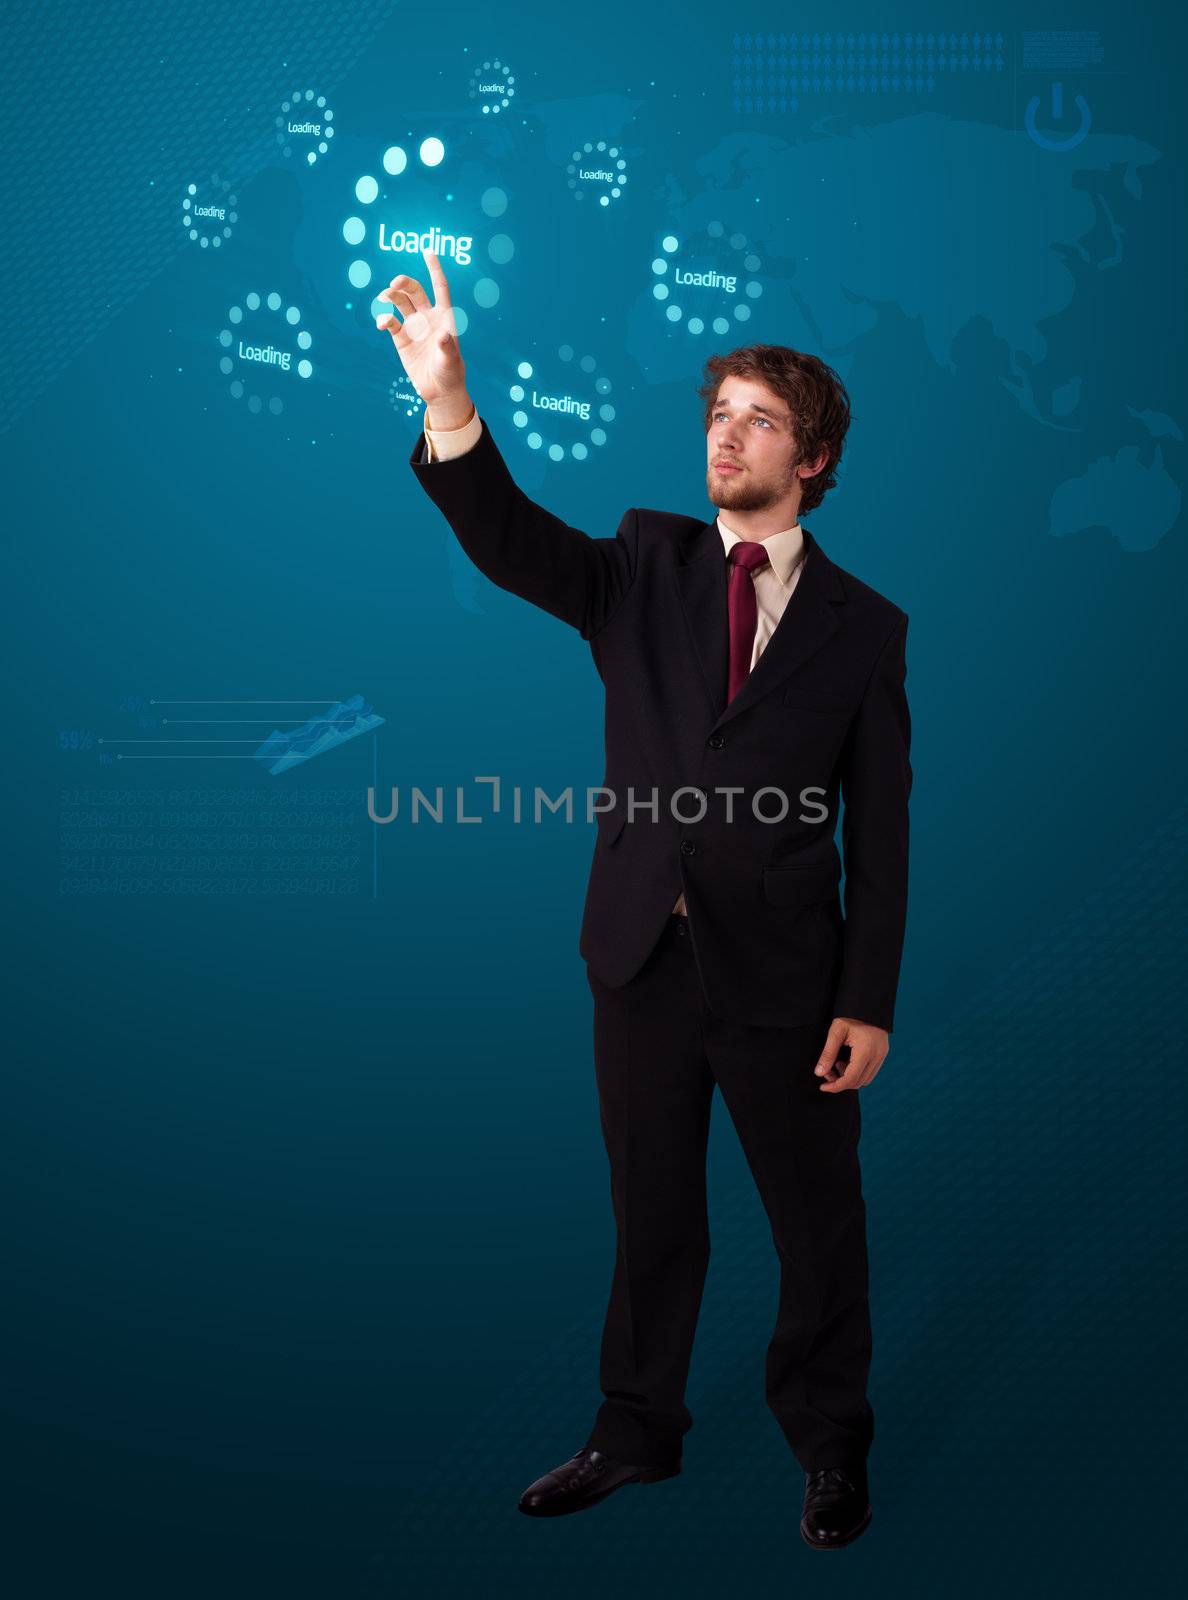 Businessman pressing simple start buttons on a virtual background